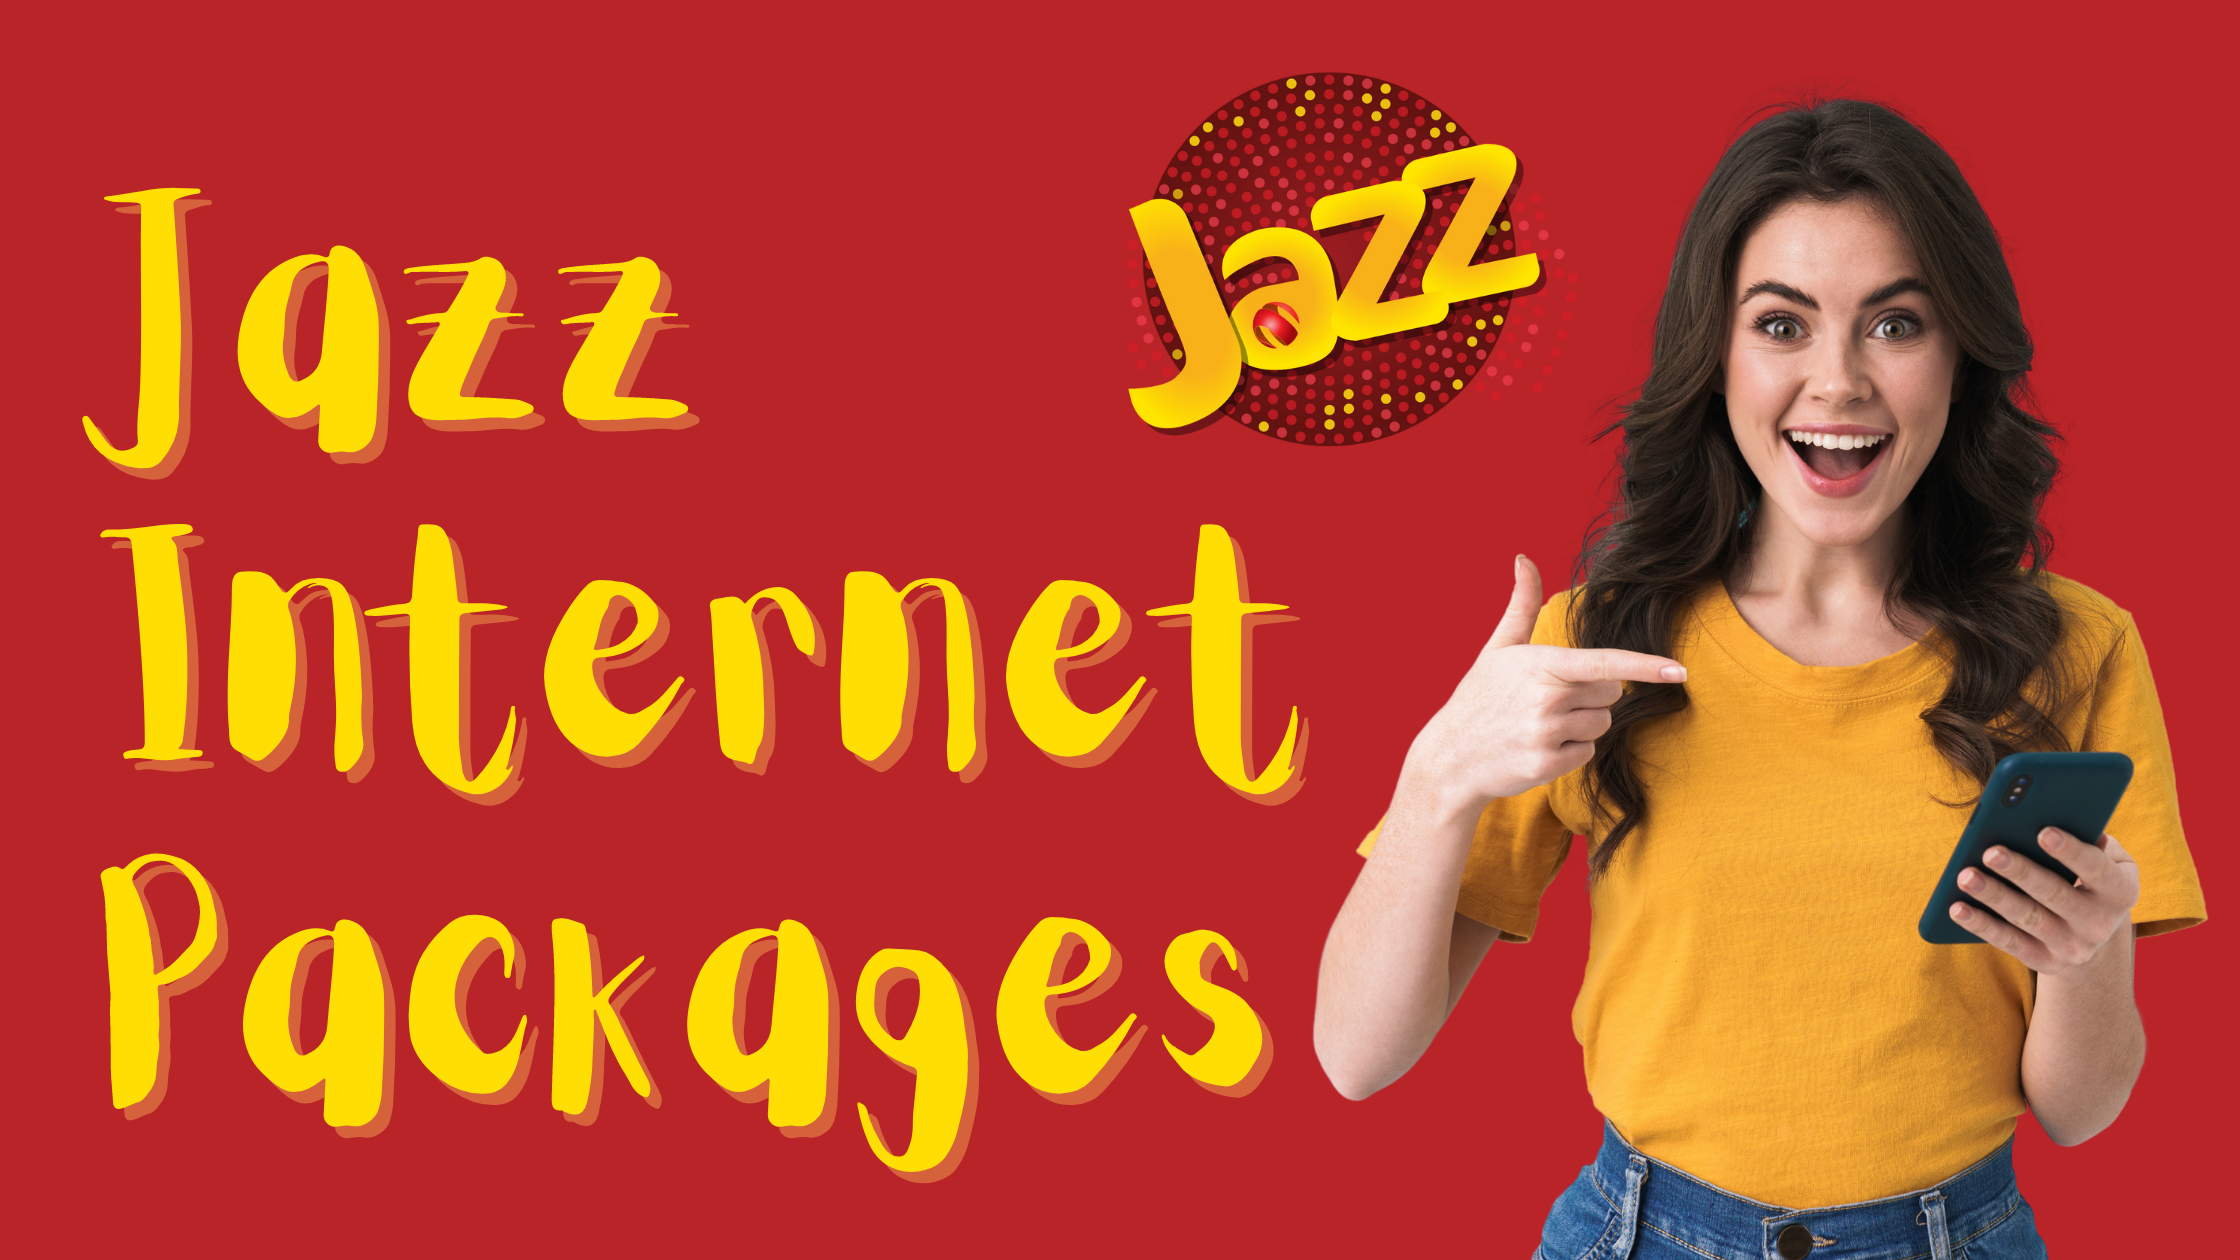 *699# jazz monthly package